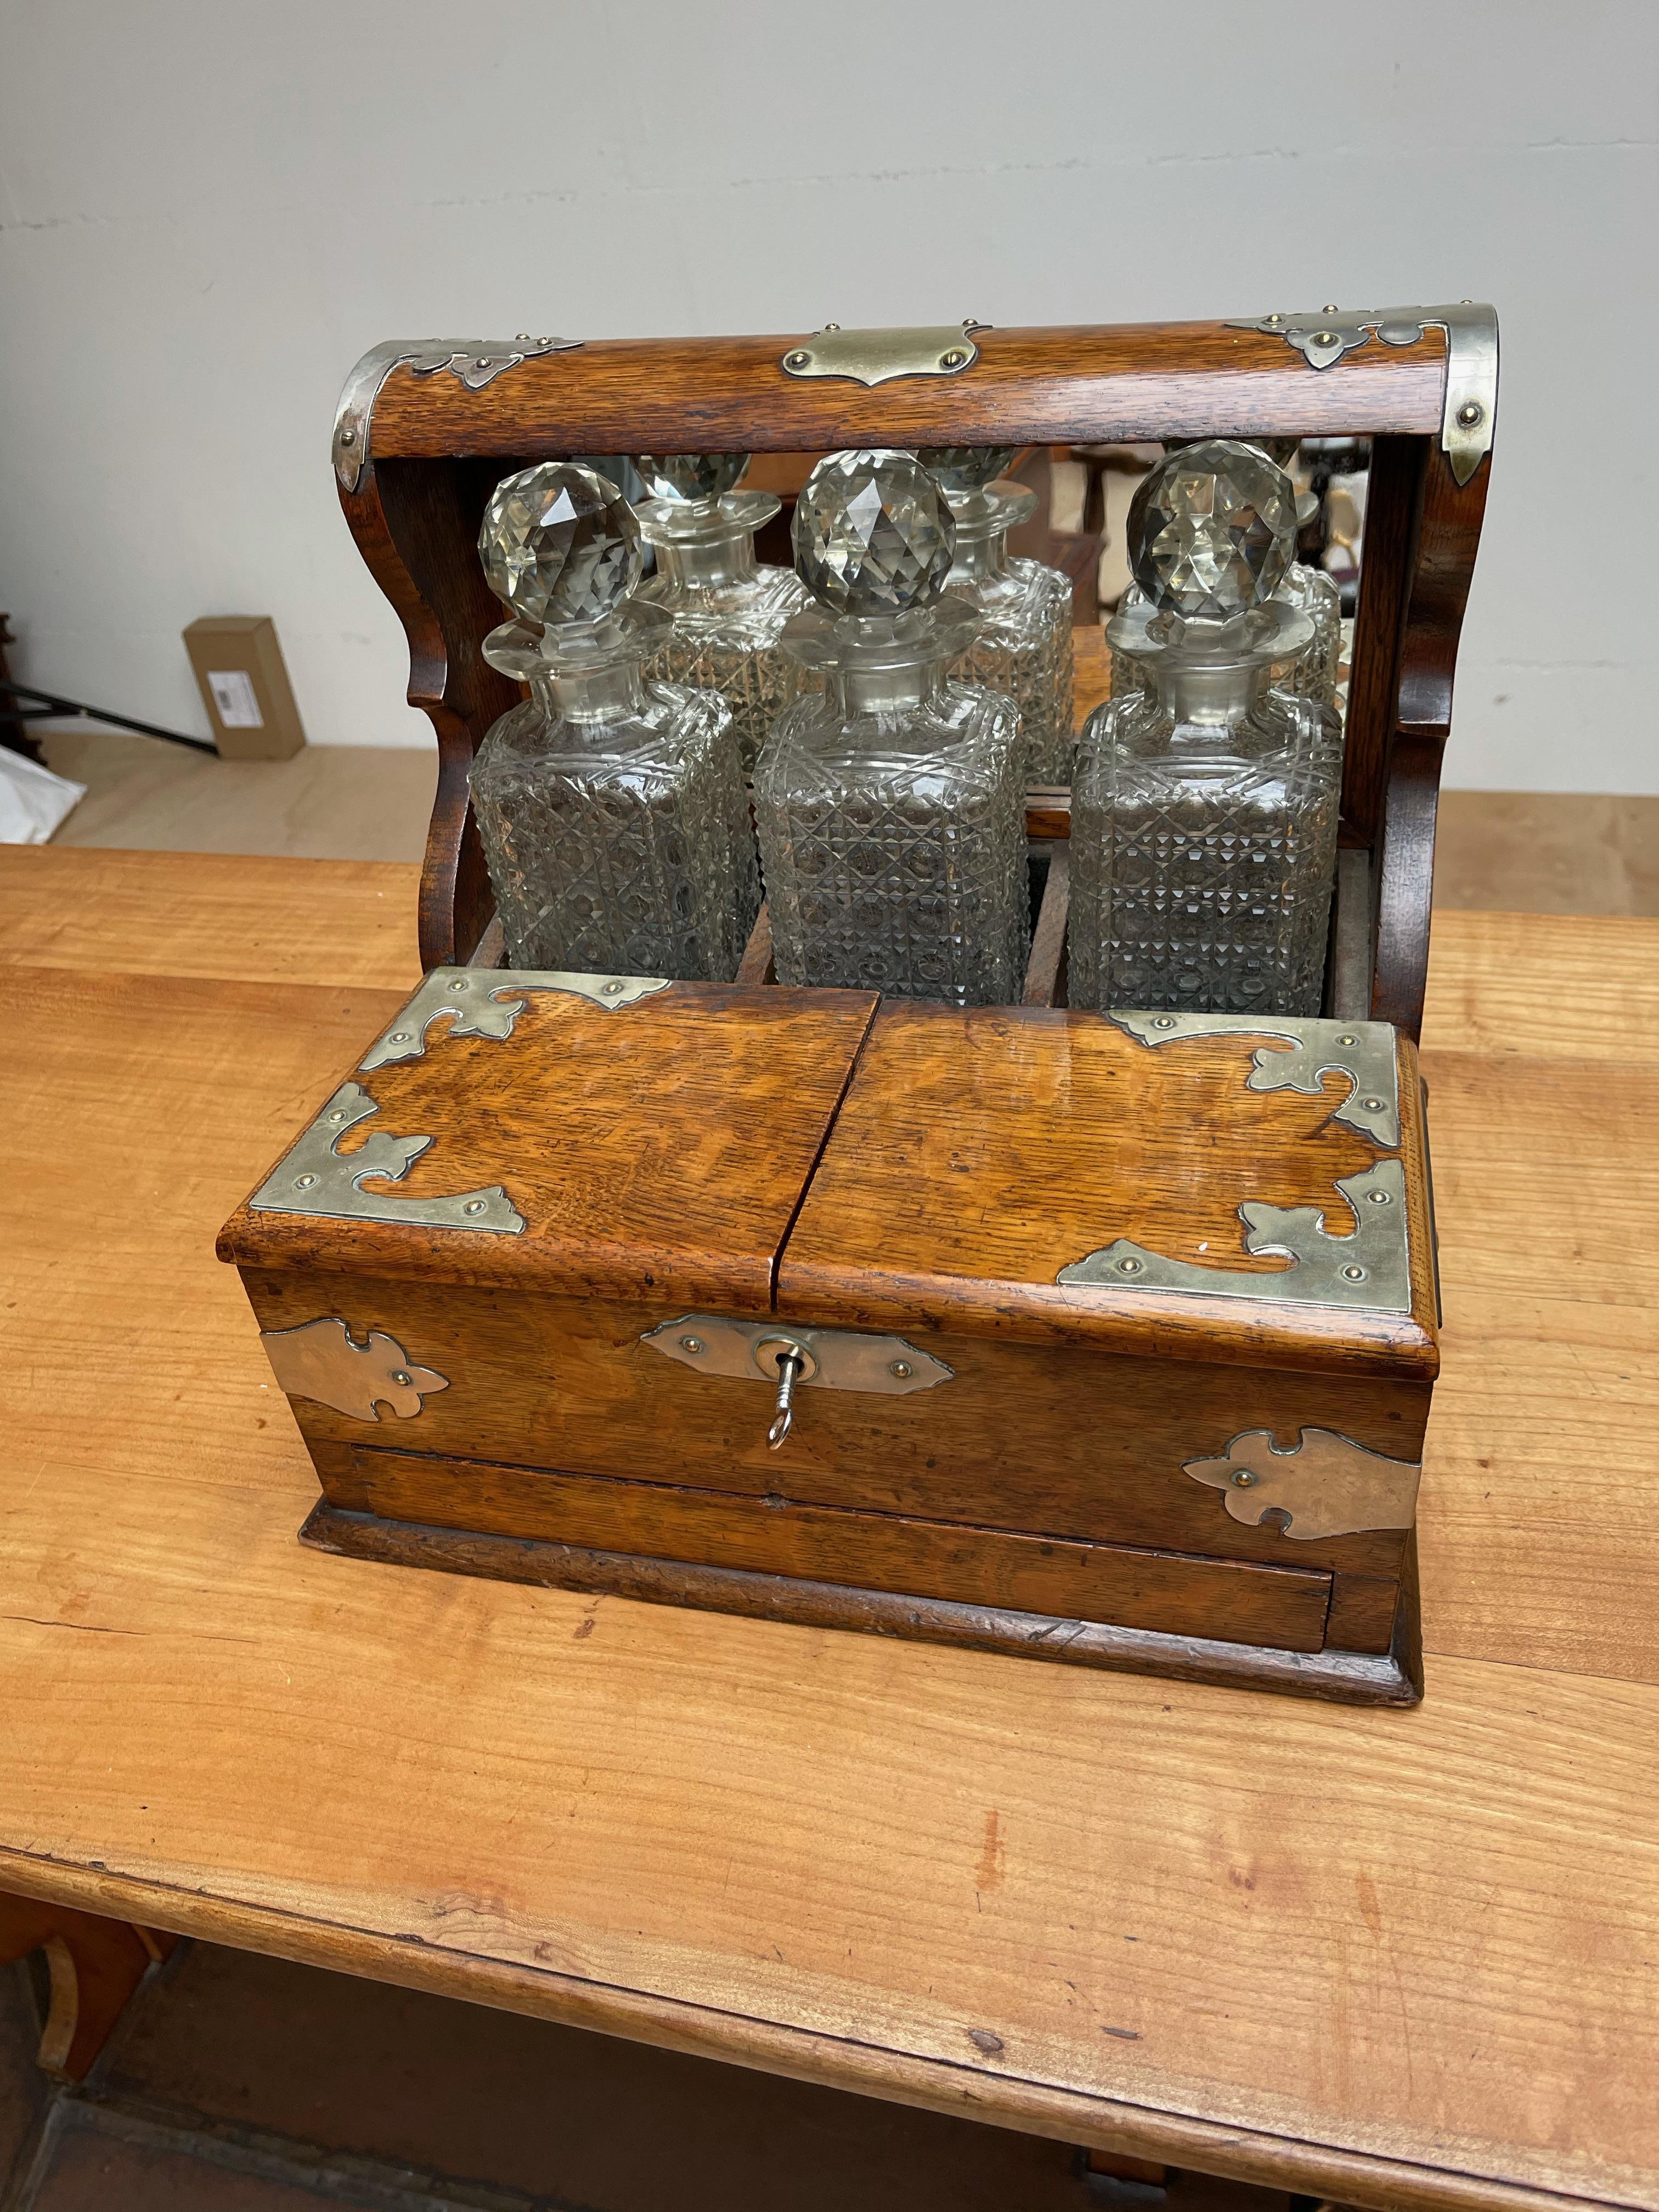 Good size and rare design, antique tantalus

This amazing condition and rare, three crystal bottles holding, tiger oak tantalus will look great everywhere. This handcrafted work of beauty dates from the early 1900s and it comes with two folding